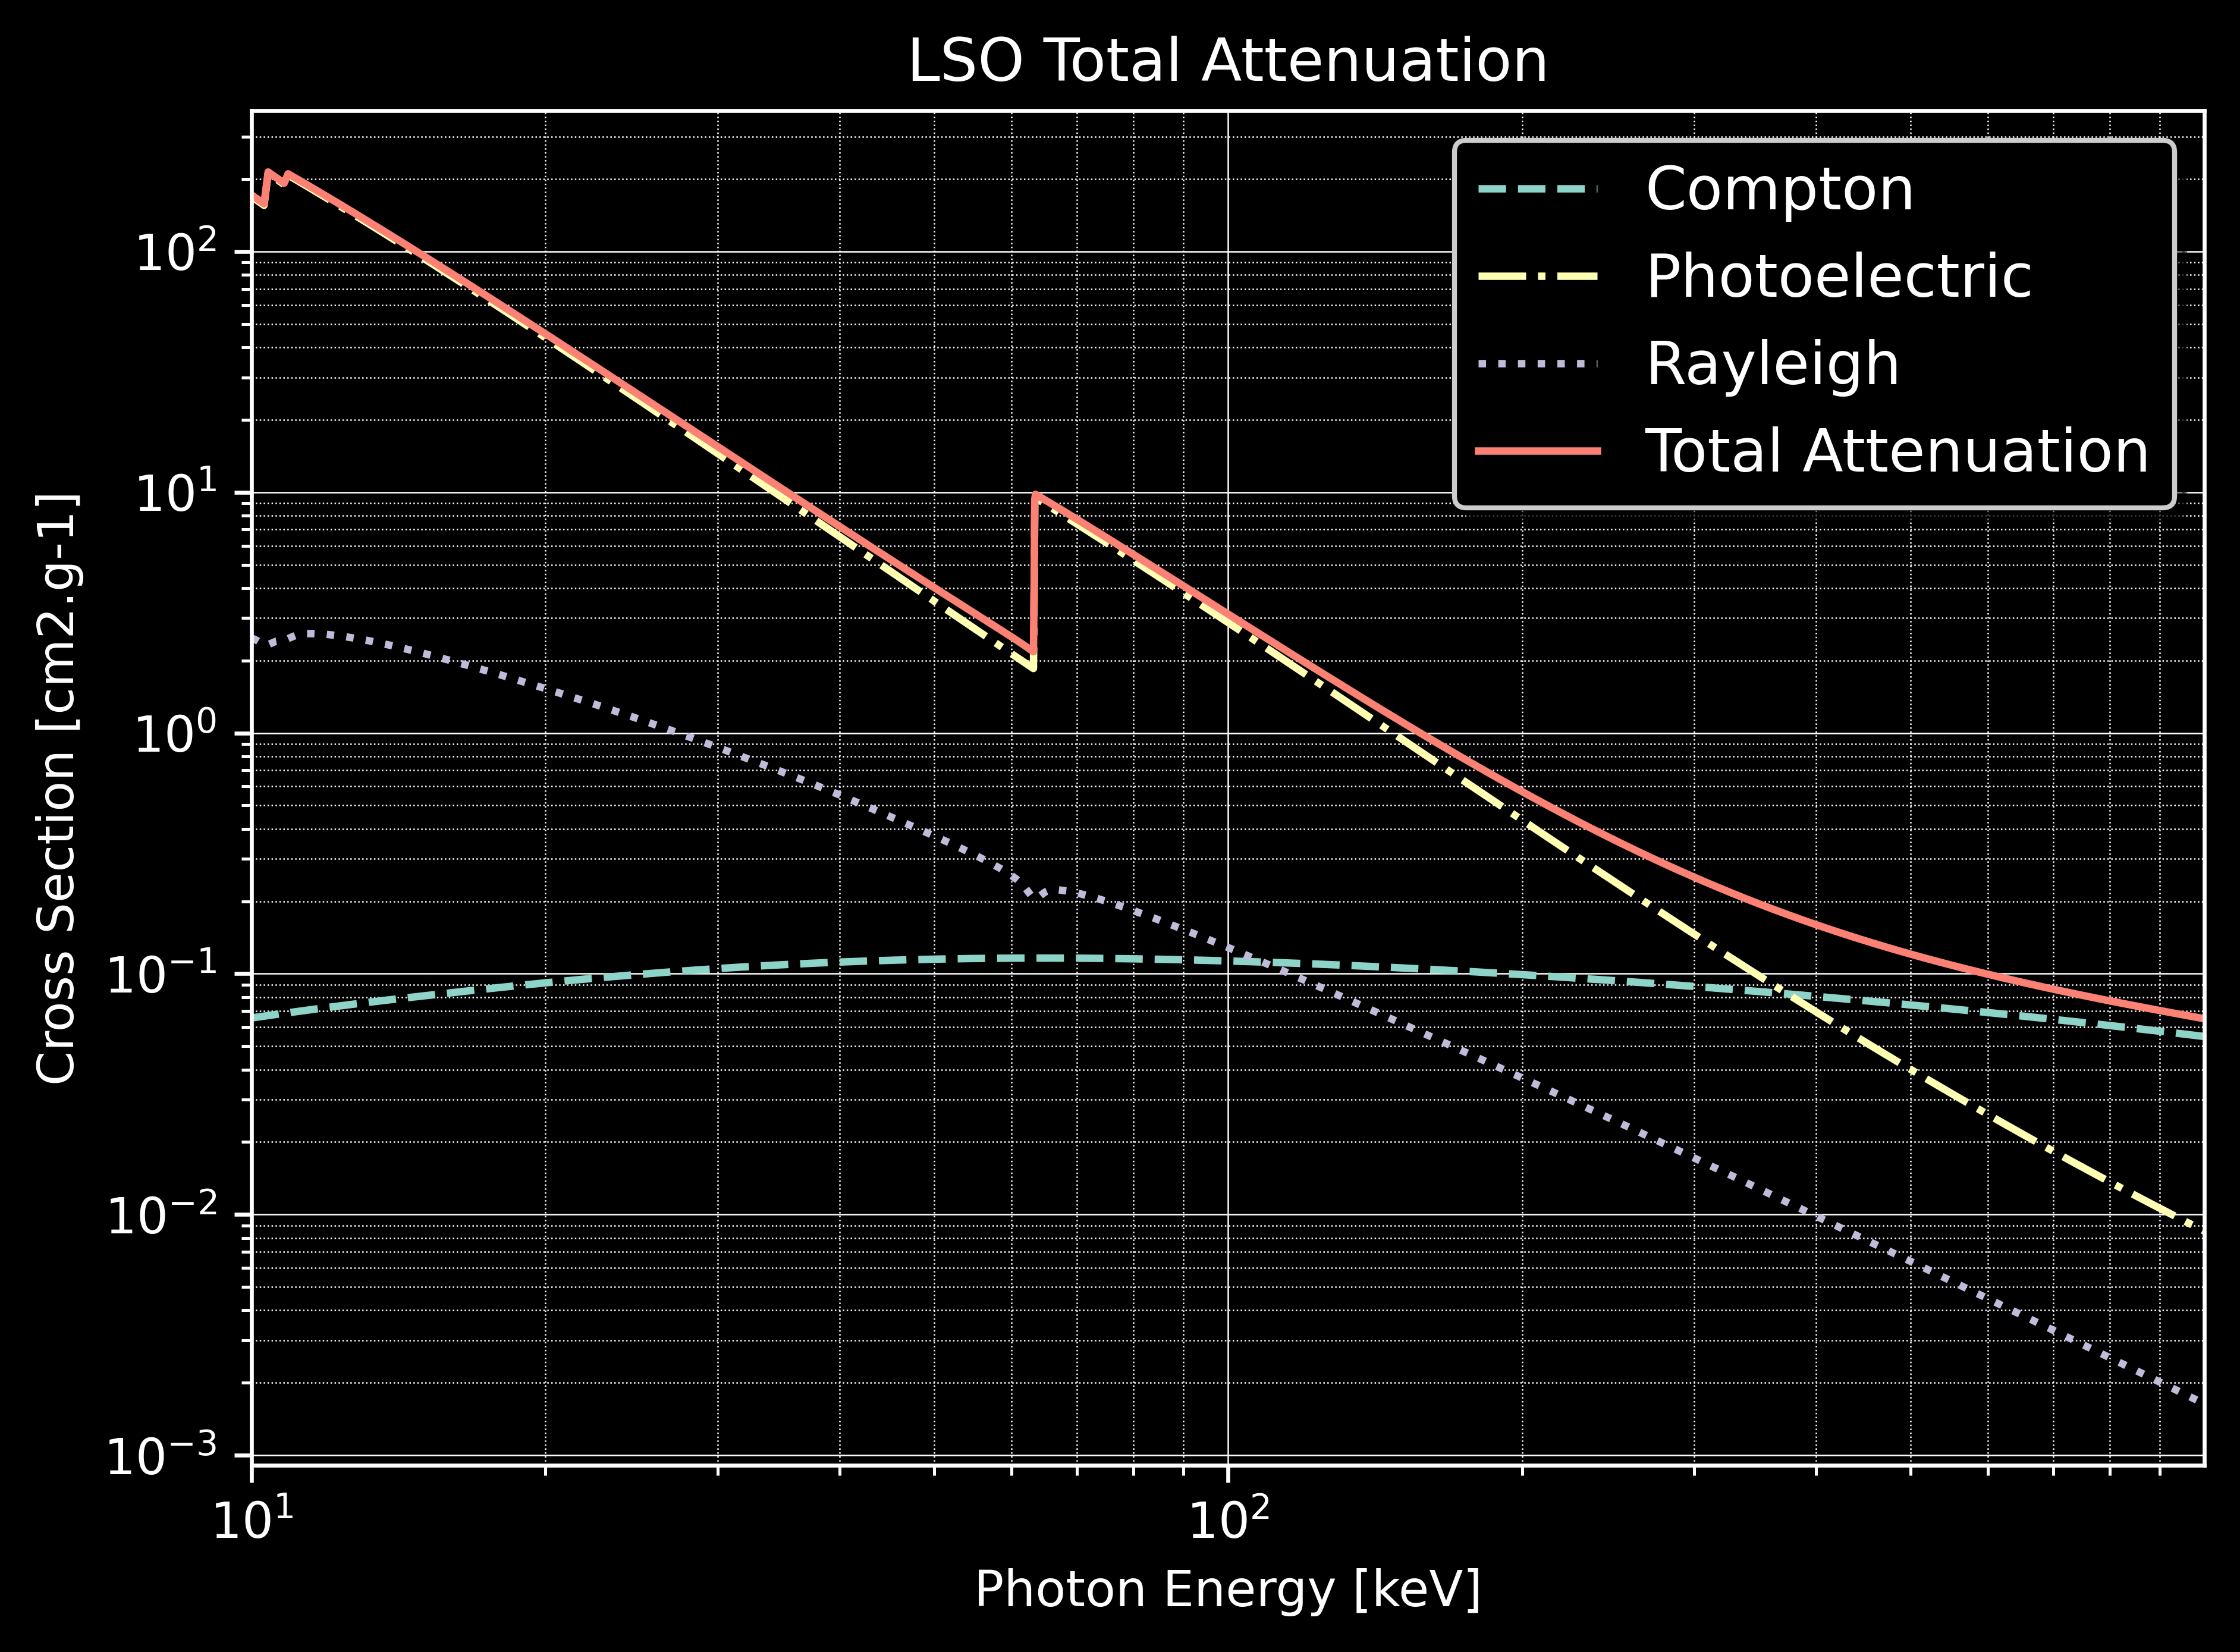 _images/LSO_Total_Attenuation.png